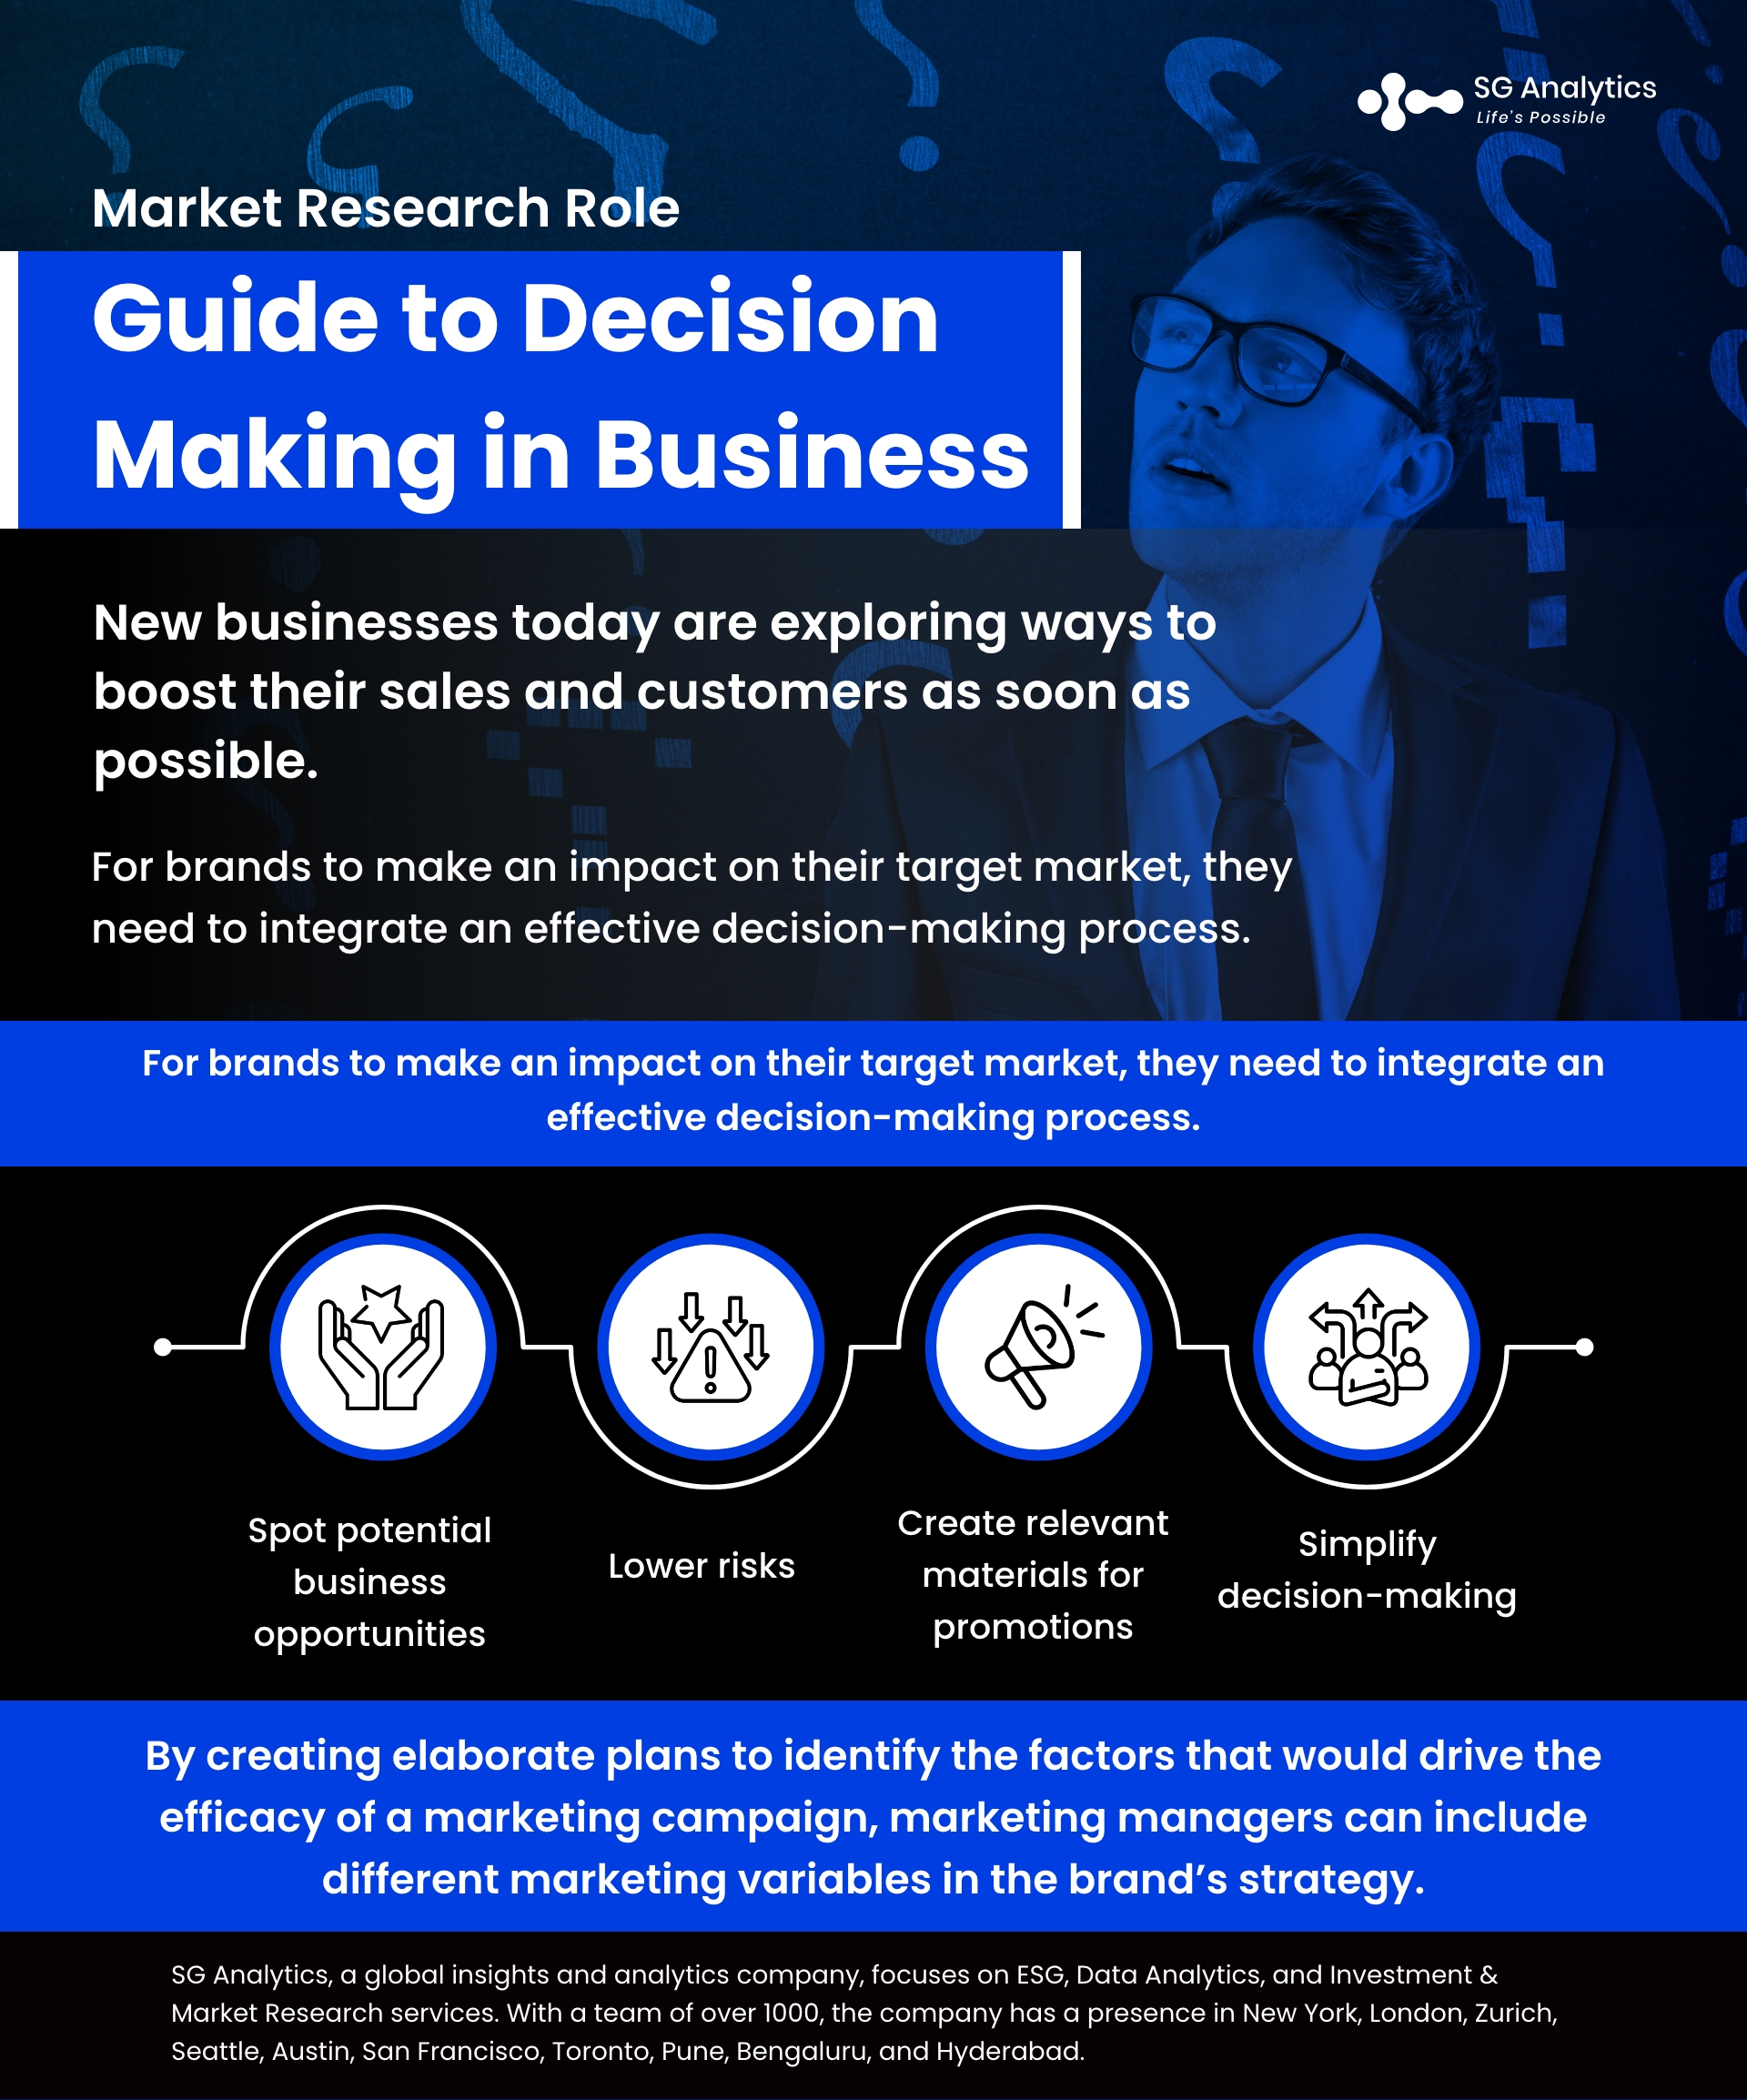 Market Research Role: Guide to Decision Making in Business